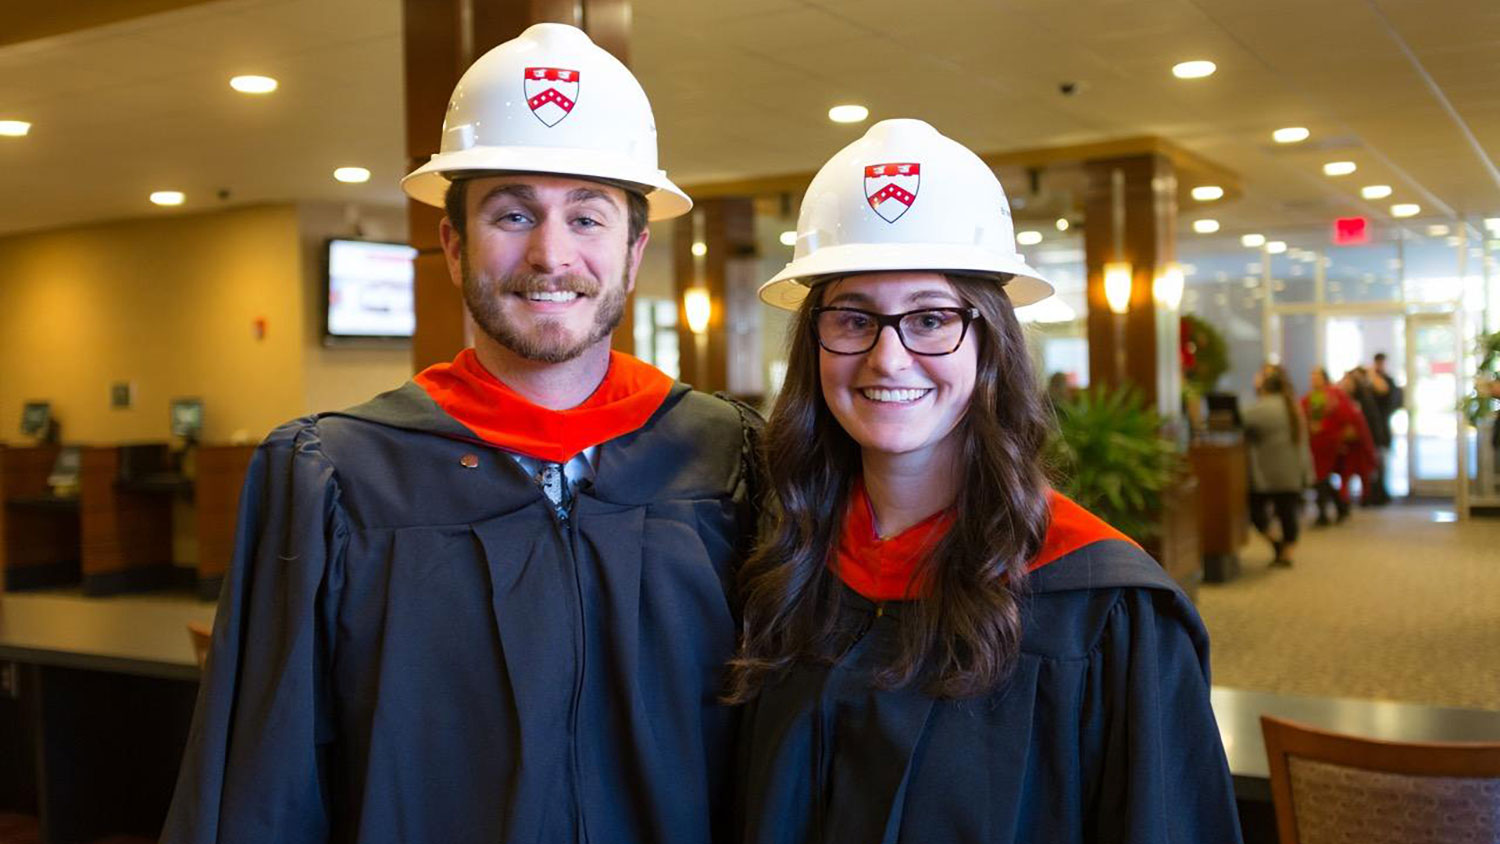 As co-workers, Jonathan Holtvedt and Lauren McCauley partnered up to complete their master’s degrees online in just two years.